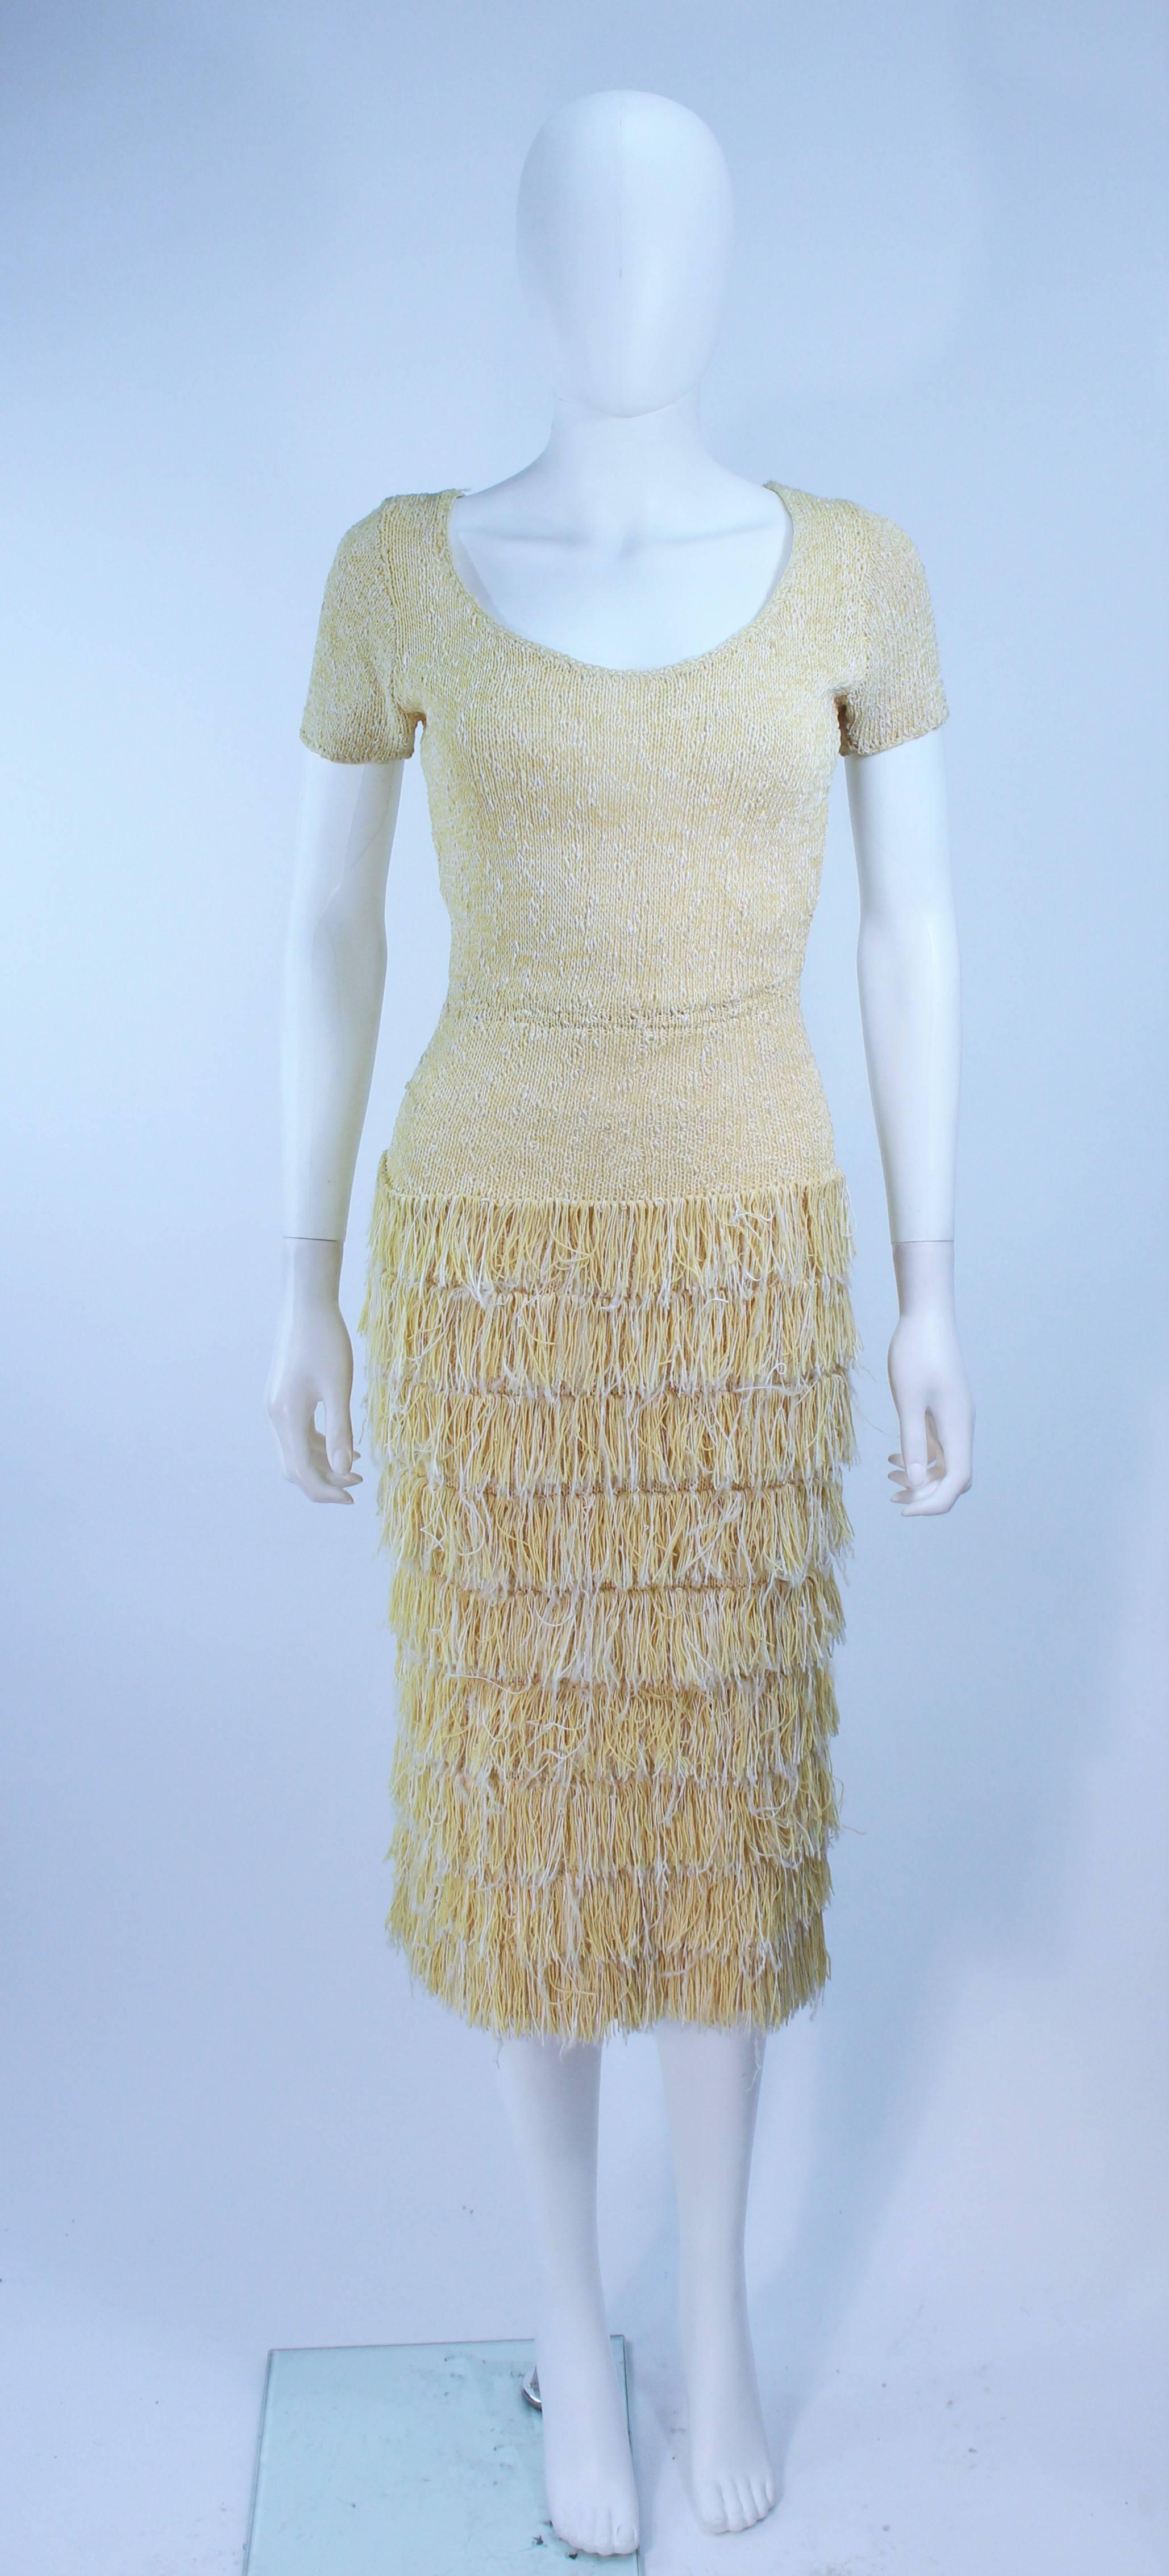 This Sydney's of Beverly Hills cocktail dress is composed of a yellow stretch hand knit. Features a fringe detail. In excellent vintage condition.

**Please cross-reference measurements for personal accuracy. Size in description box is an